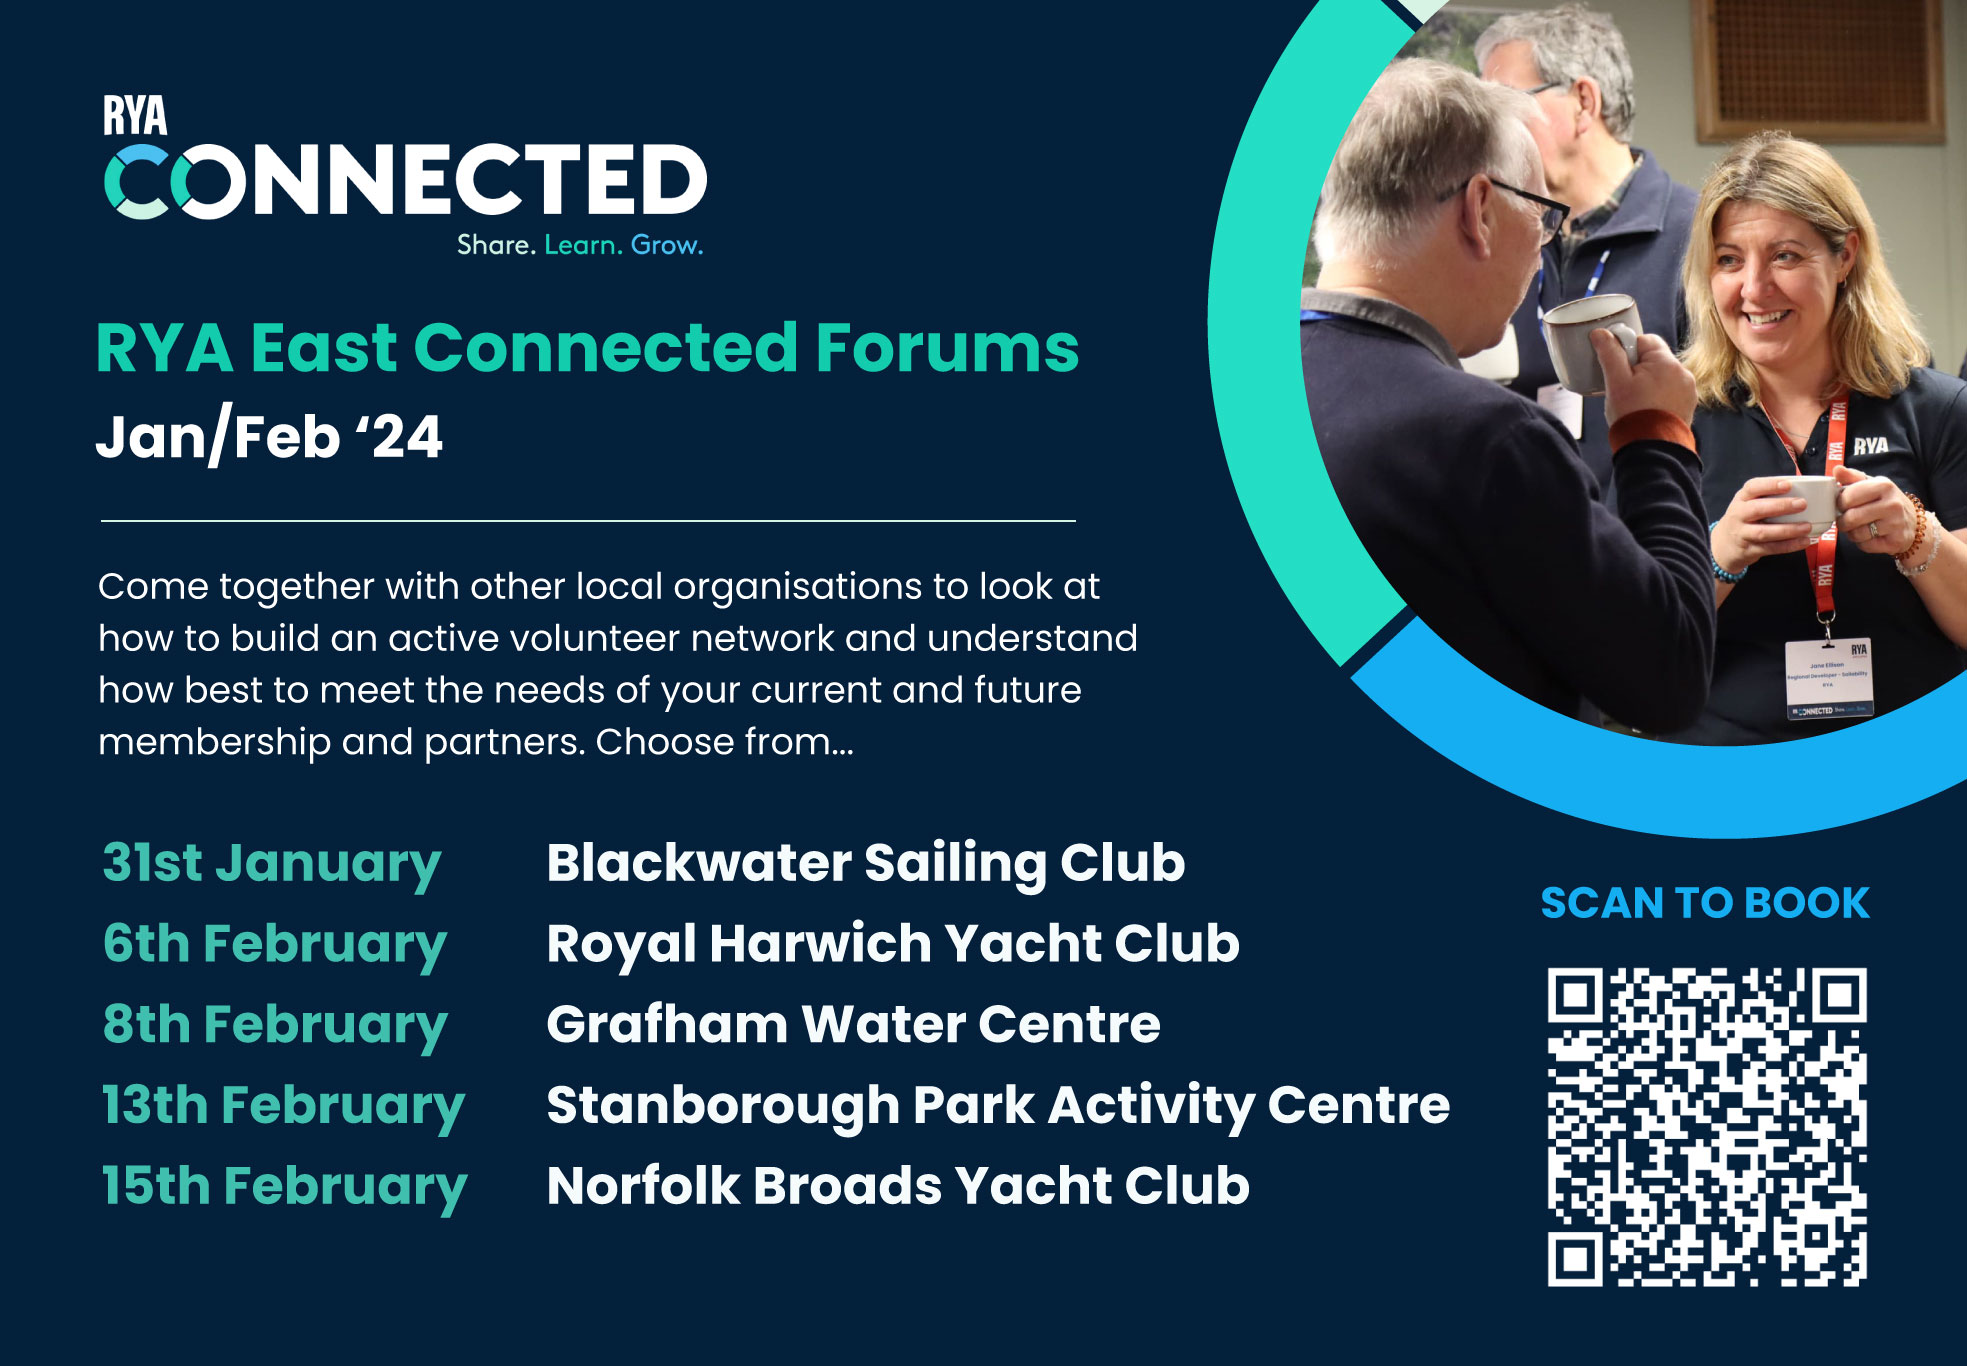 Take a look at RYA East Connected Forums